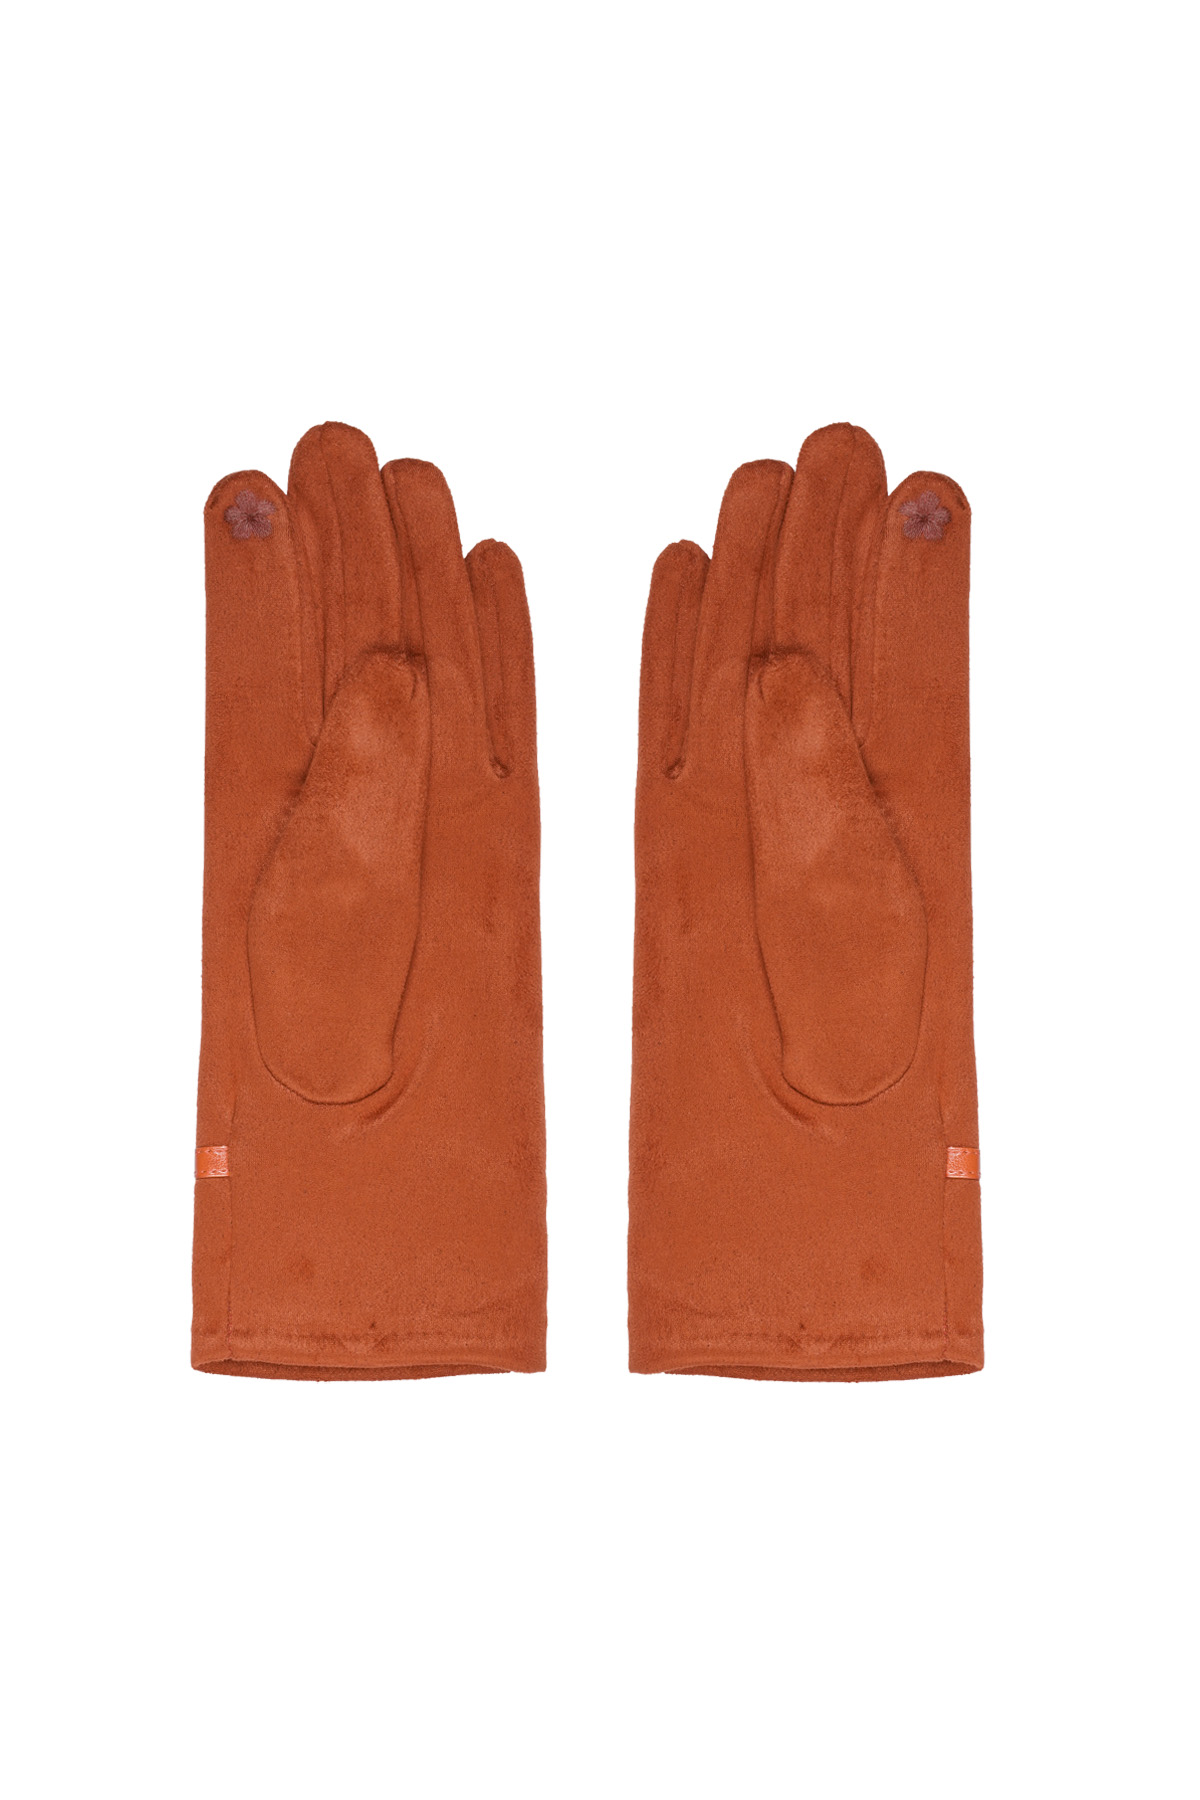 Gloves shouted - orange h5 Picture3